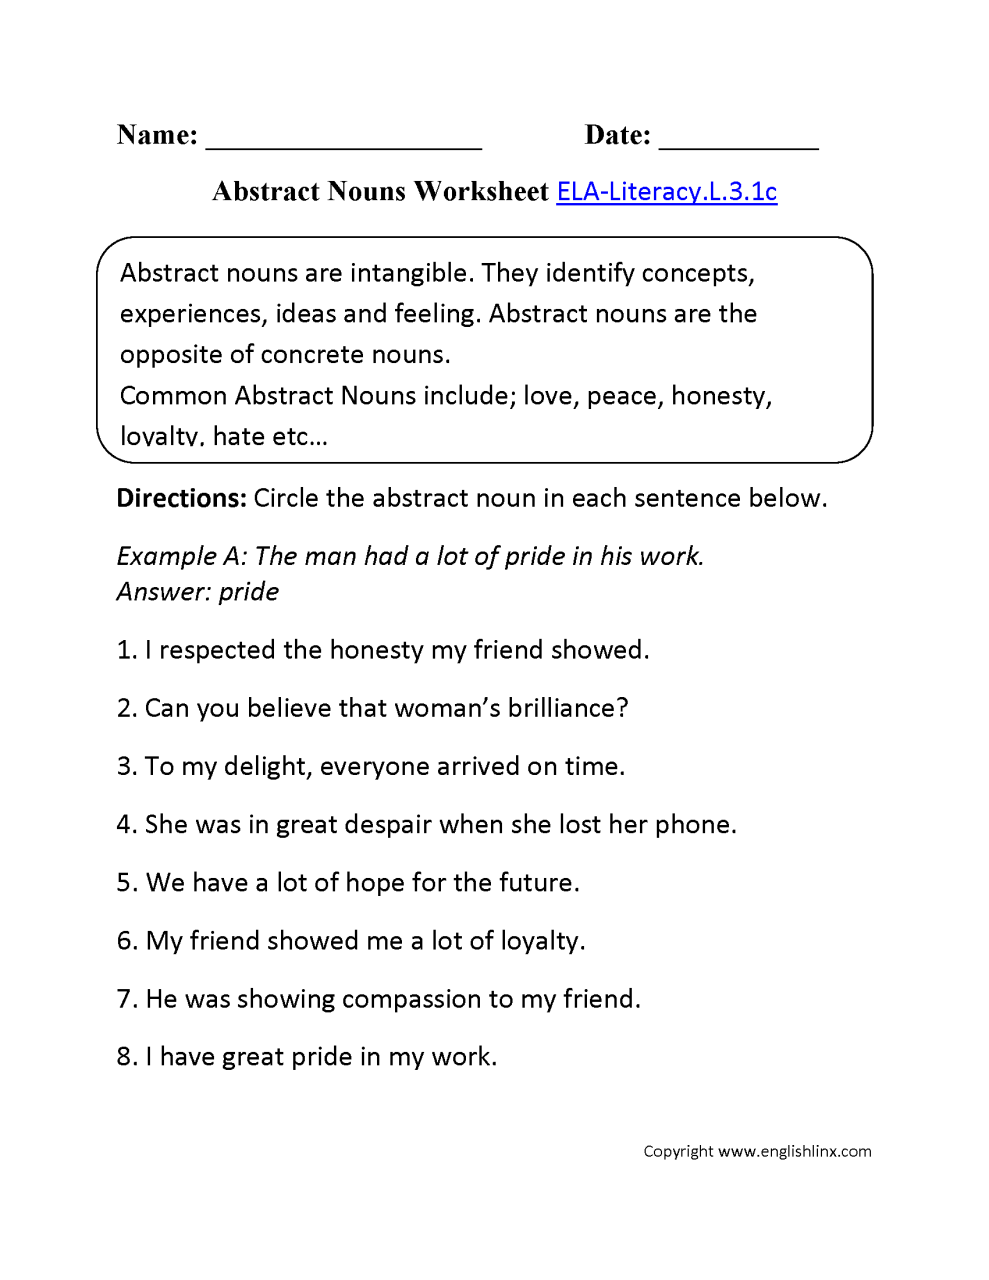 Exponents Worksheets Grade 8 Answers